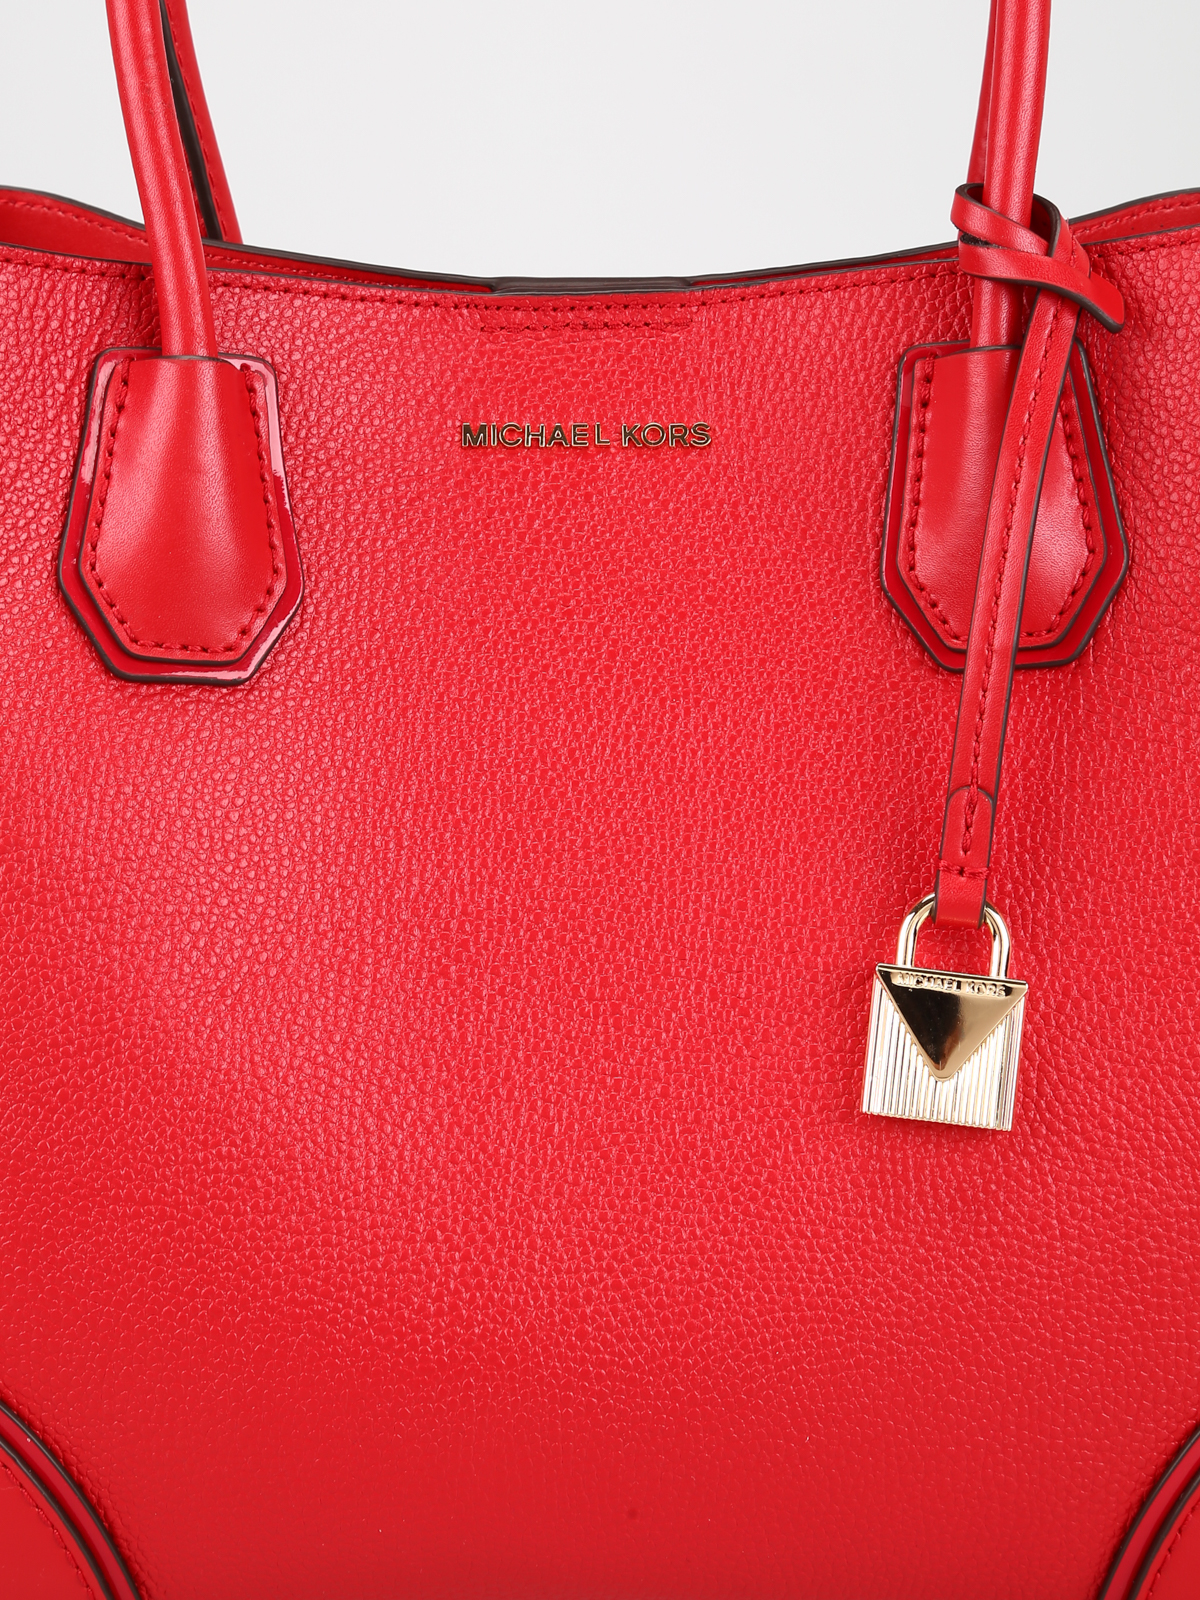 Totes bags Michael Kors - Mercer Gallery bright red leather tote -  30H7GZ5T6A683